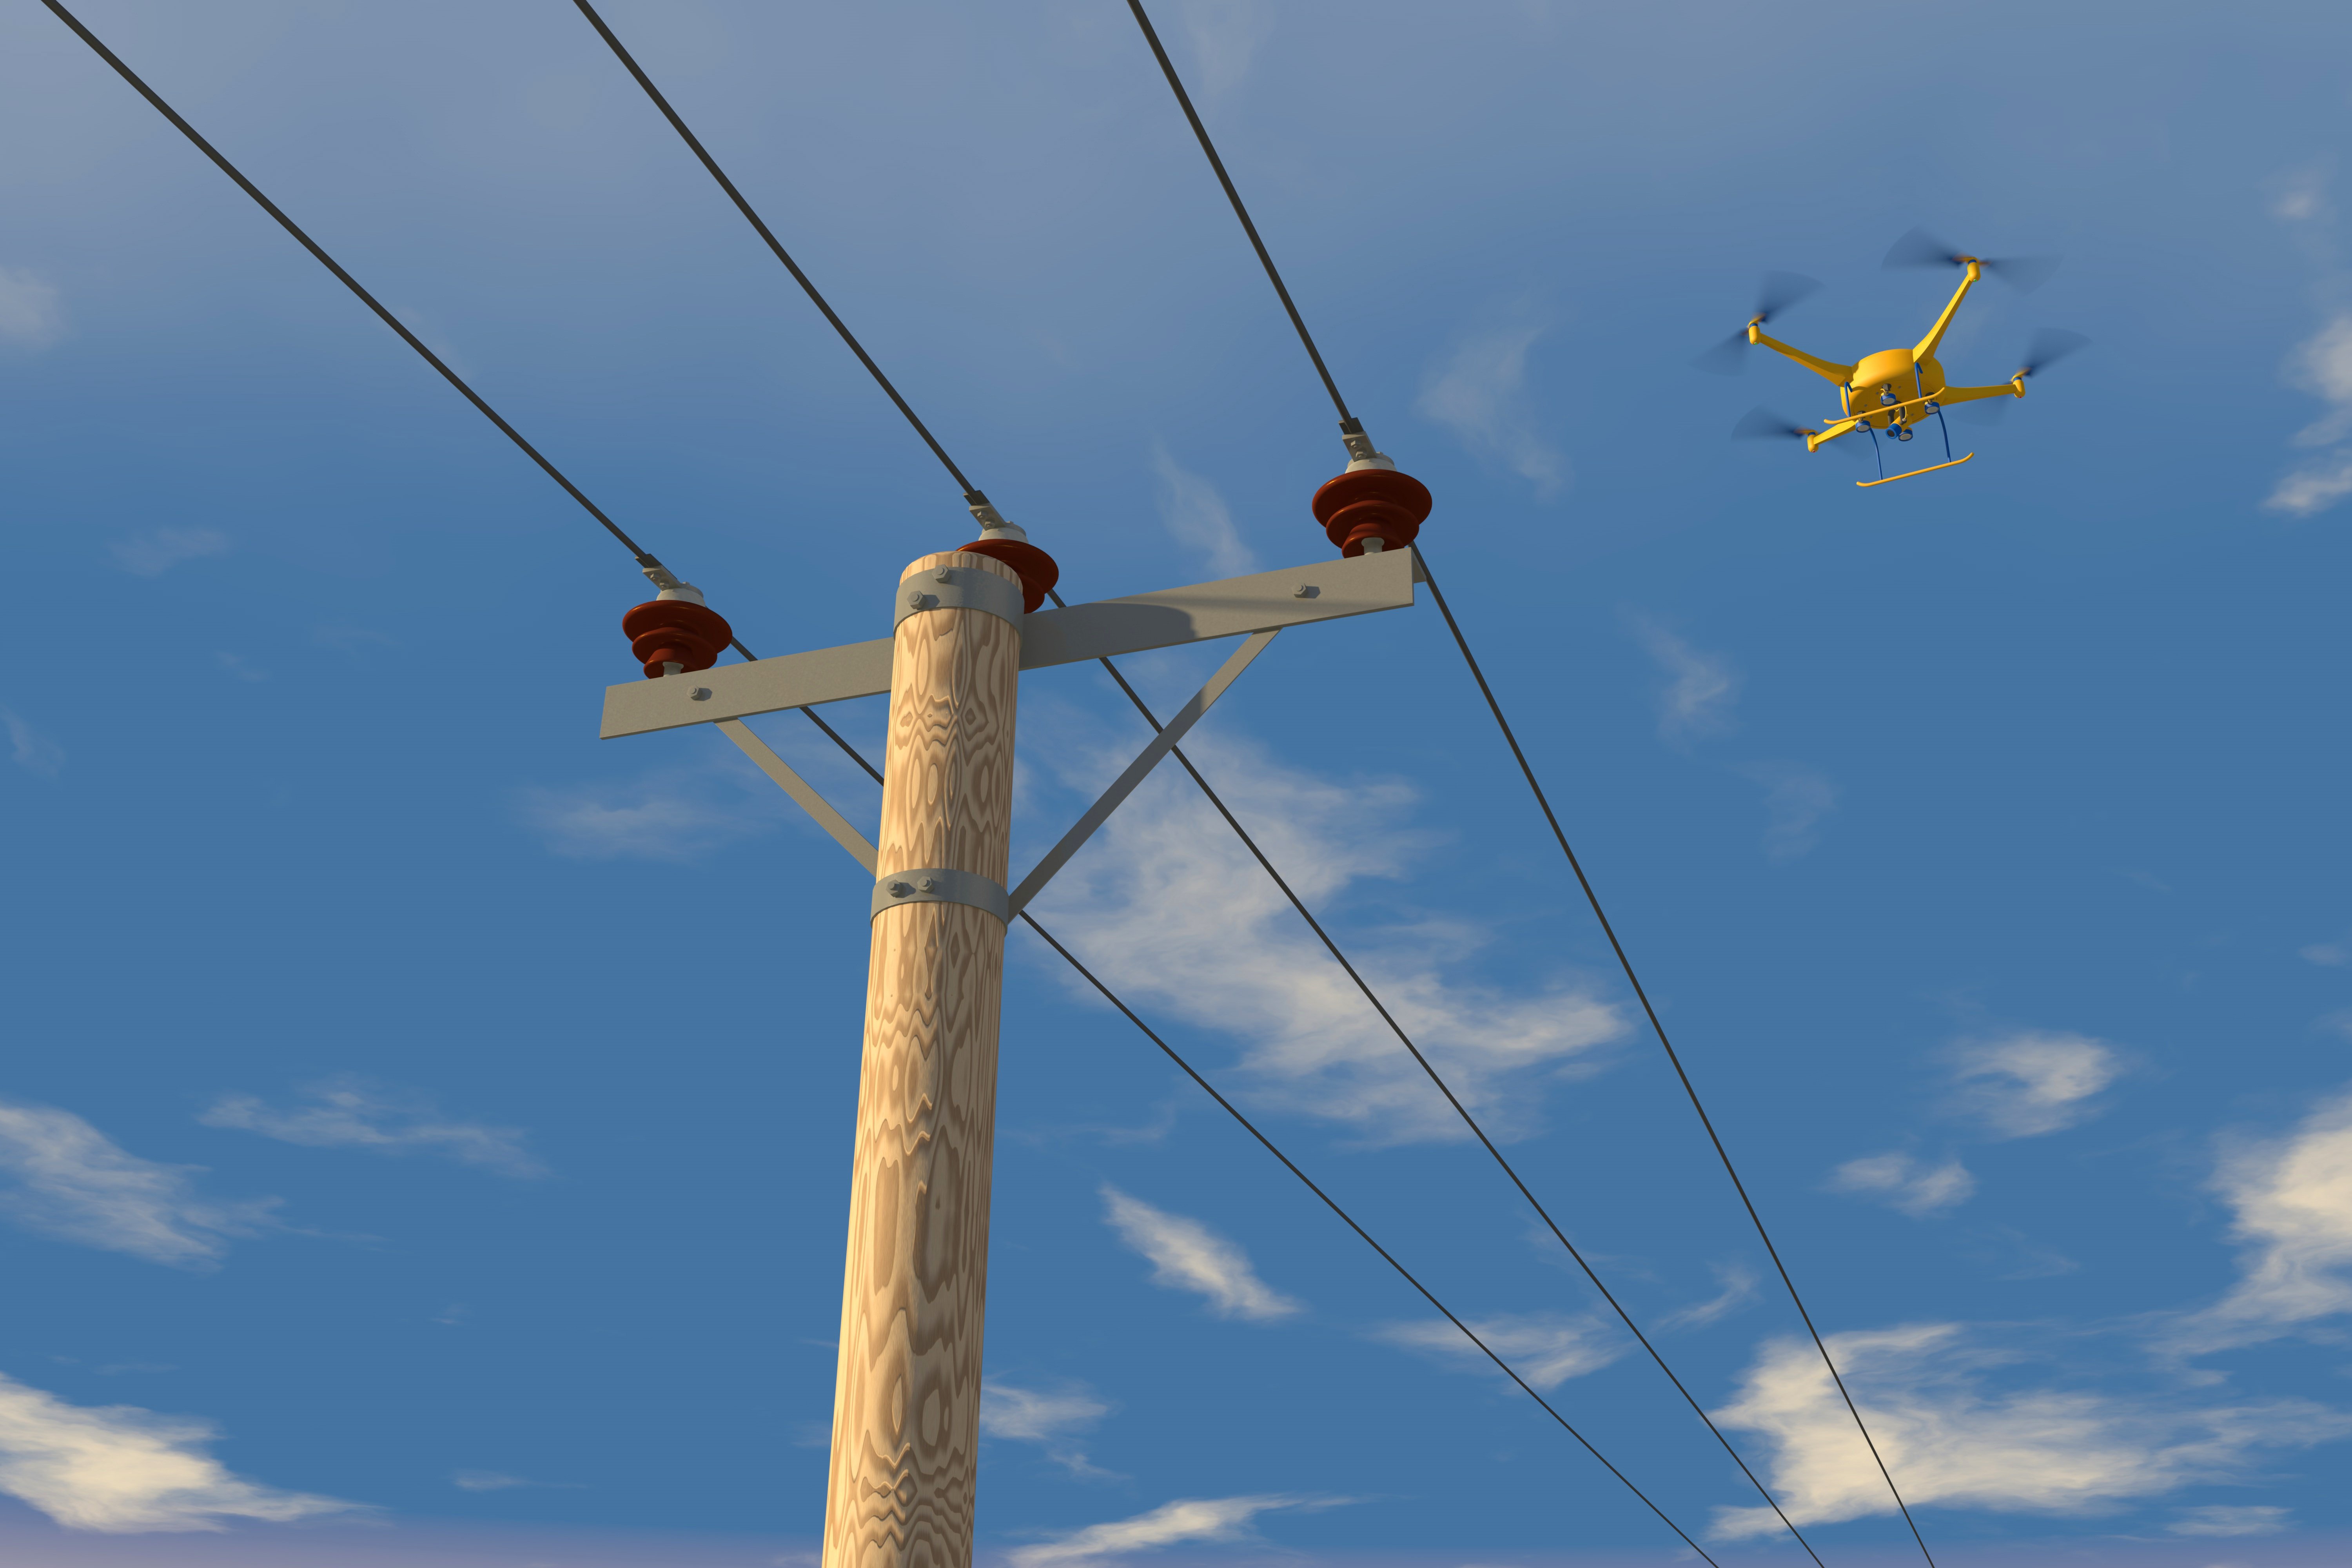 How Drones Have Changed the Utilities Industry